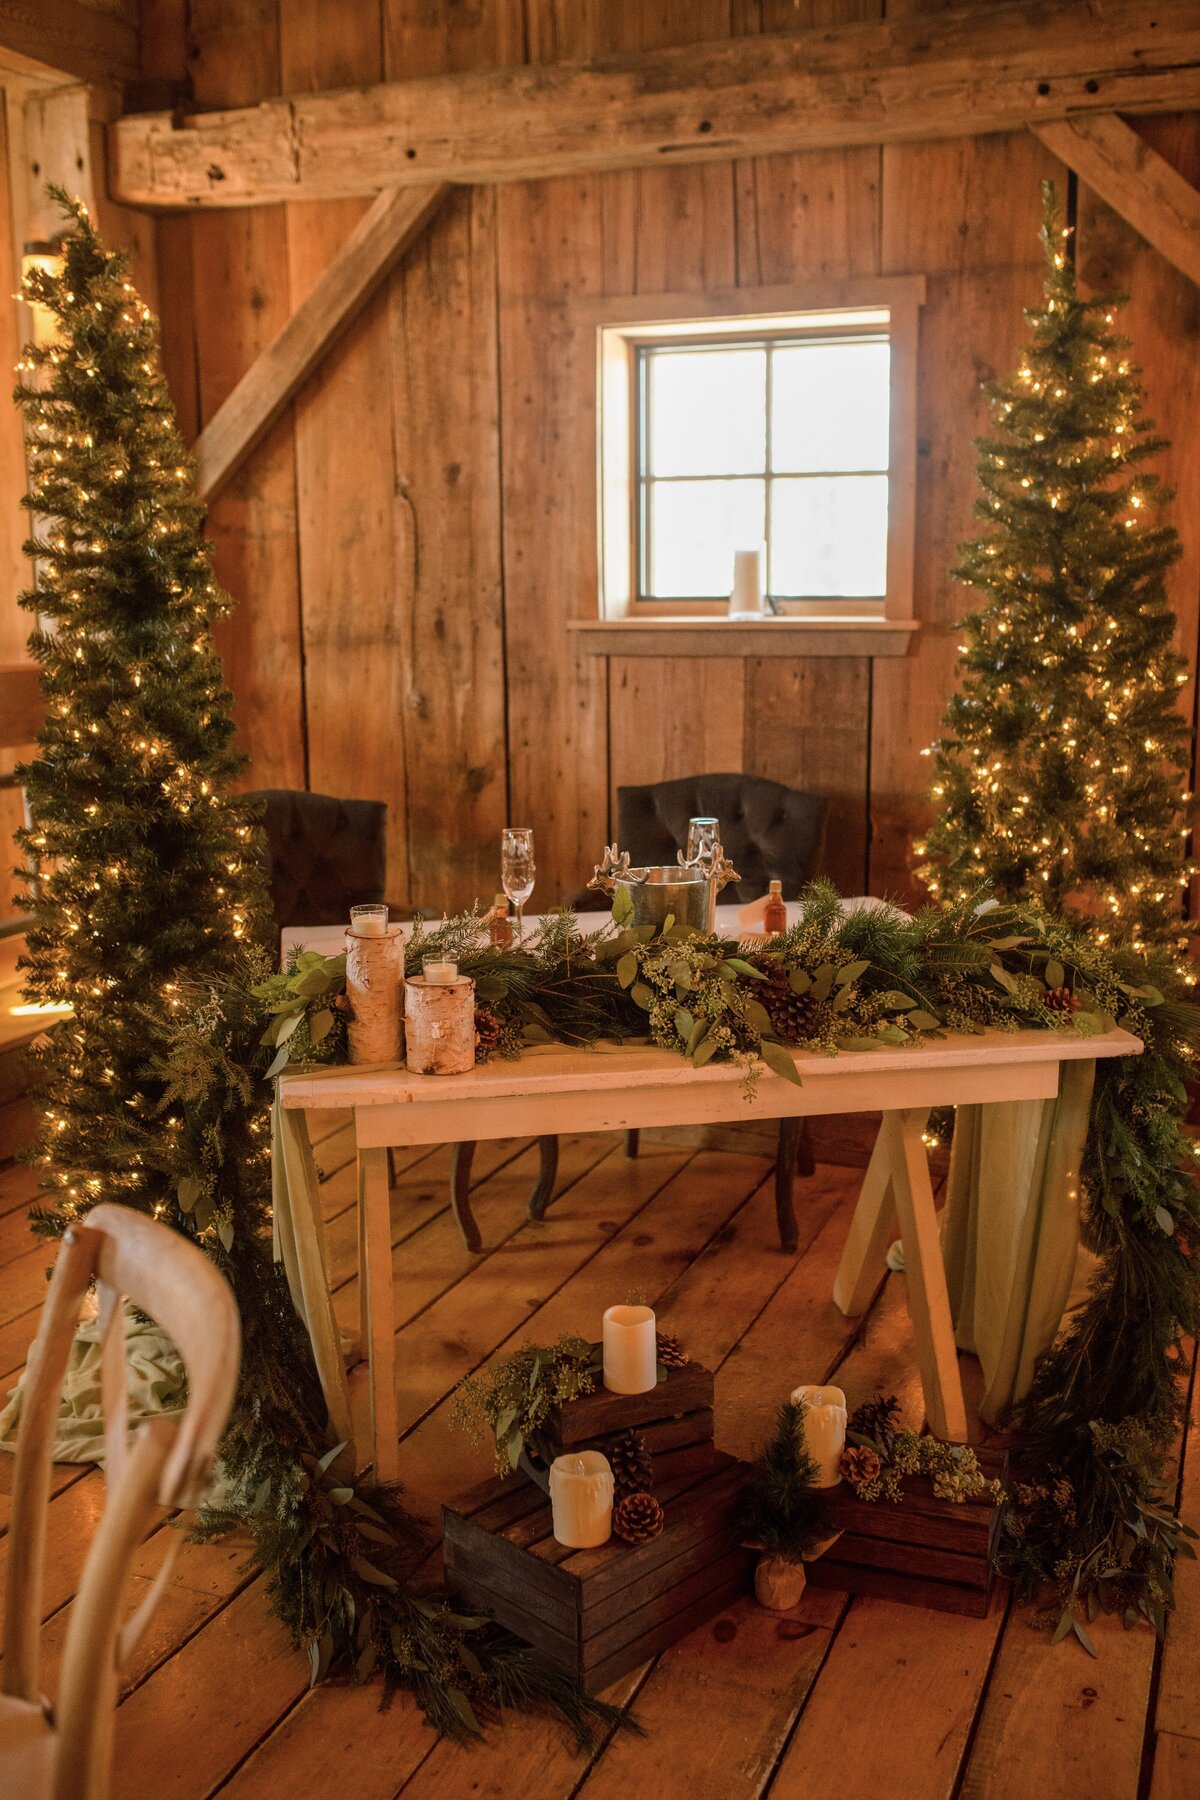 Wintry garland and candles cascading across the sweetheart table